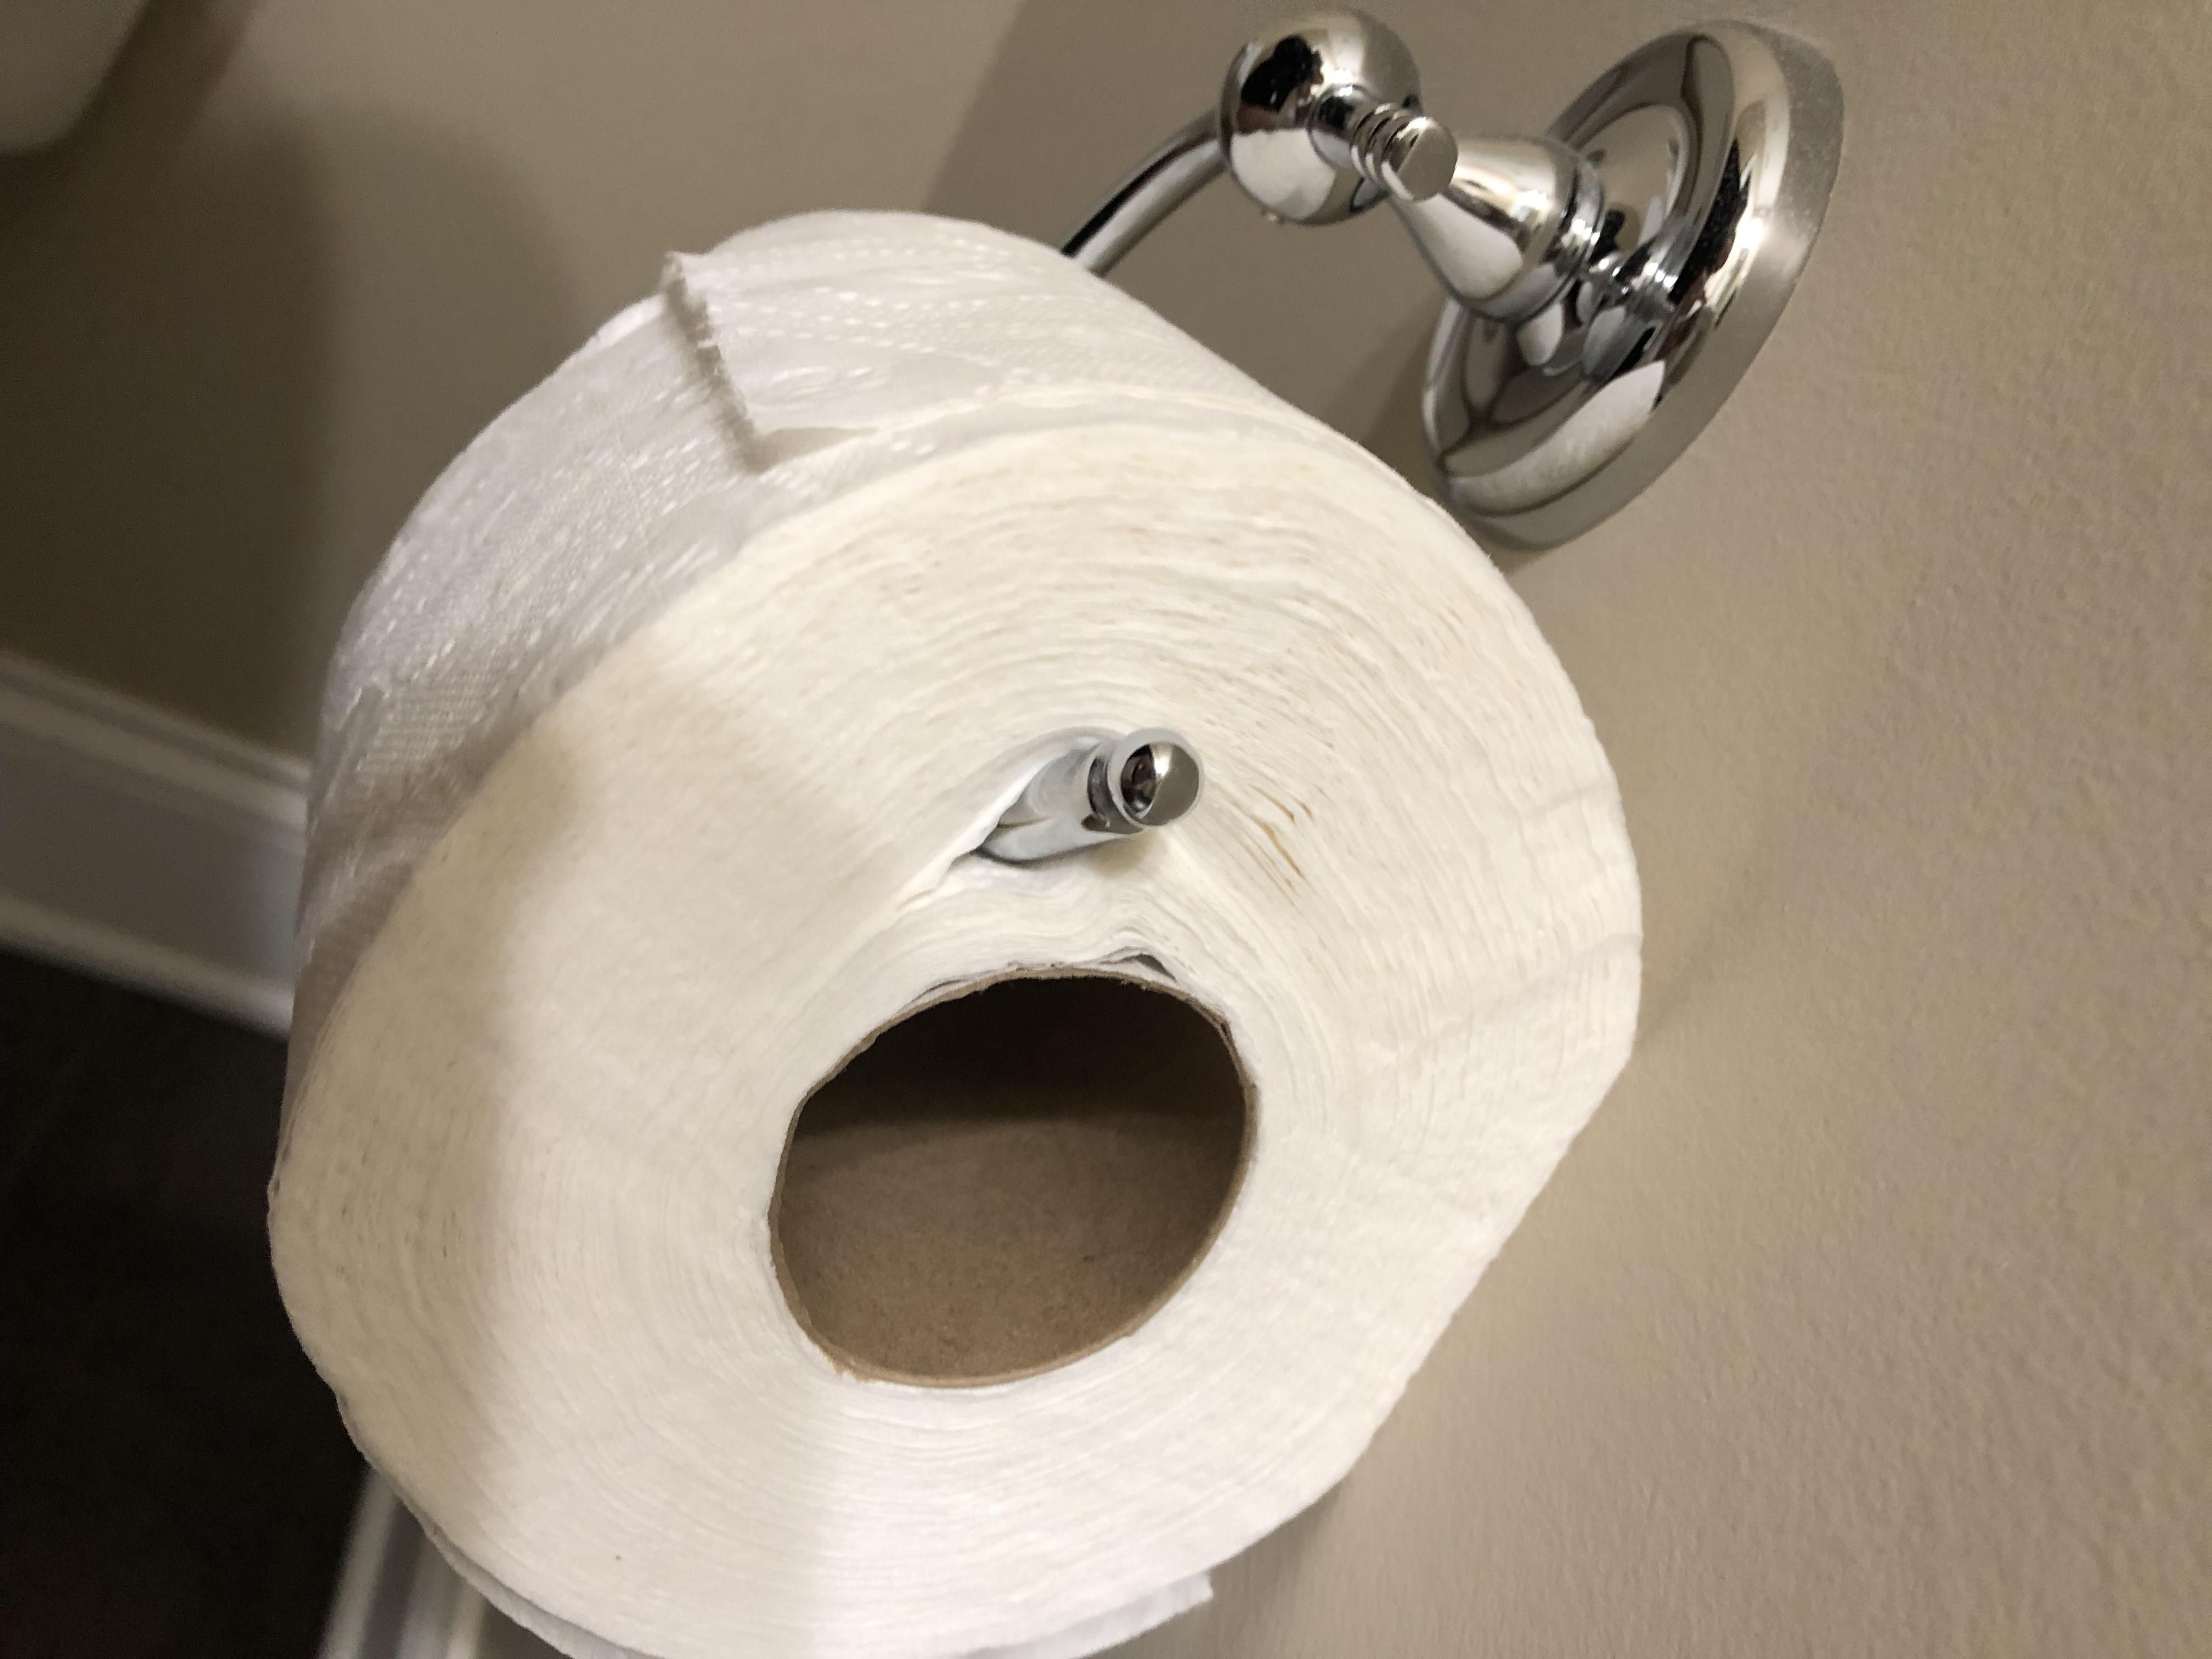 My husband always forgets to put a new roll of toilet paper on. Today he didn’t forget